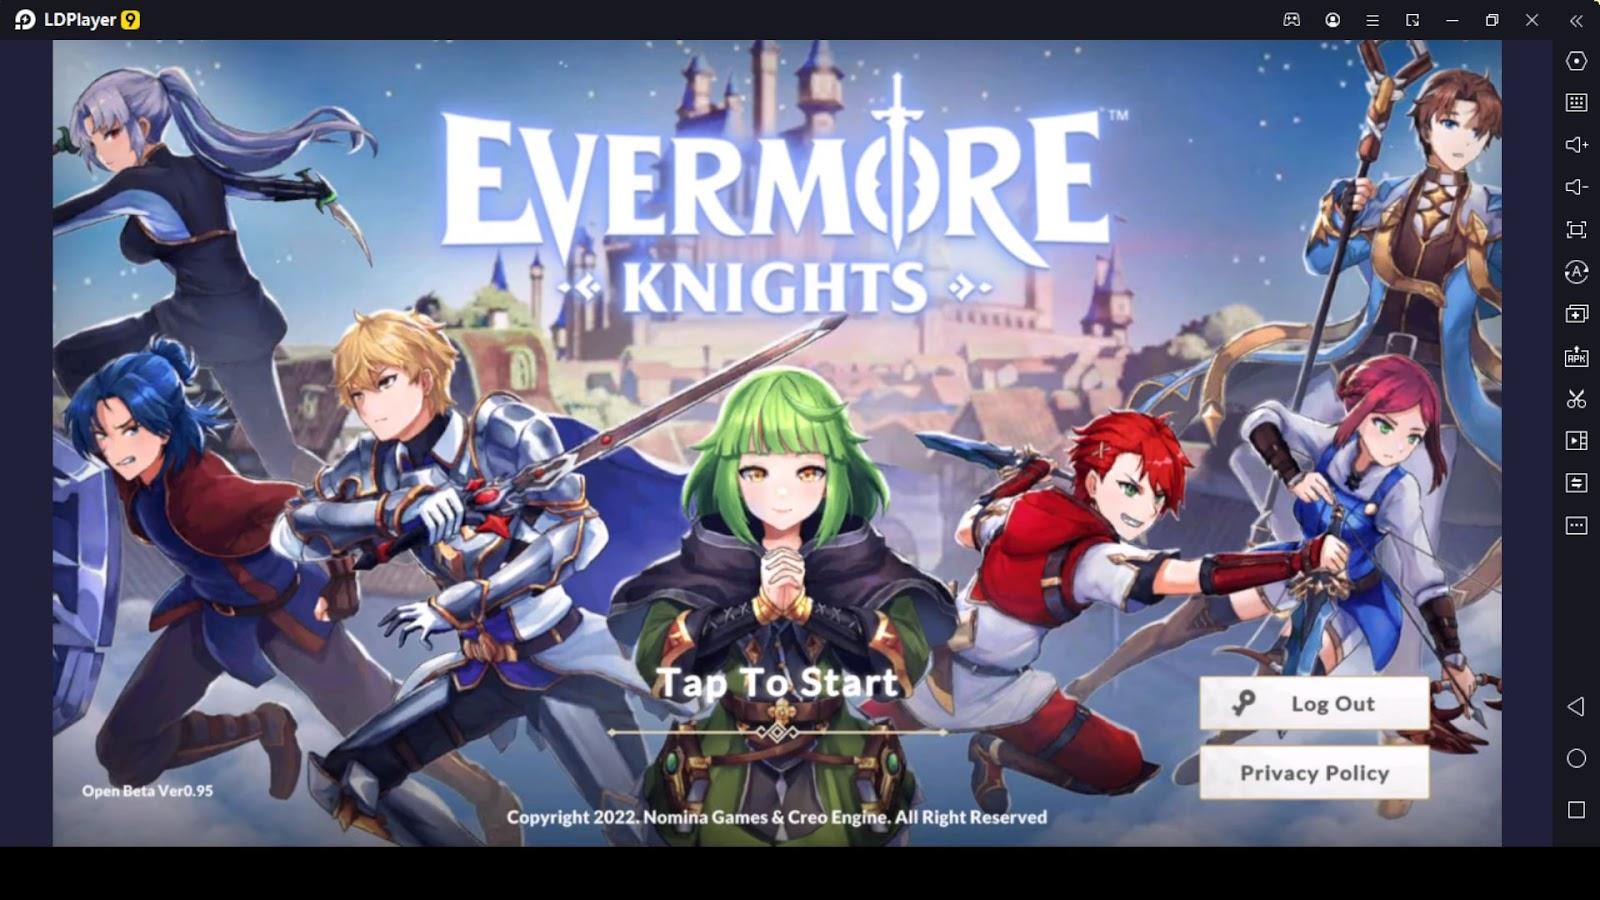 LDPlayer Evermore Knights Beginner Guide with Tips